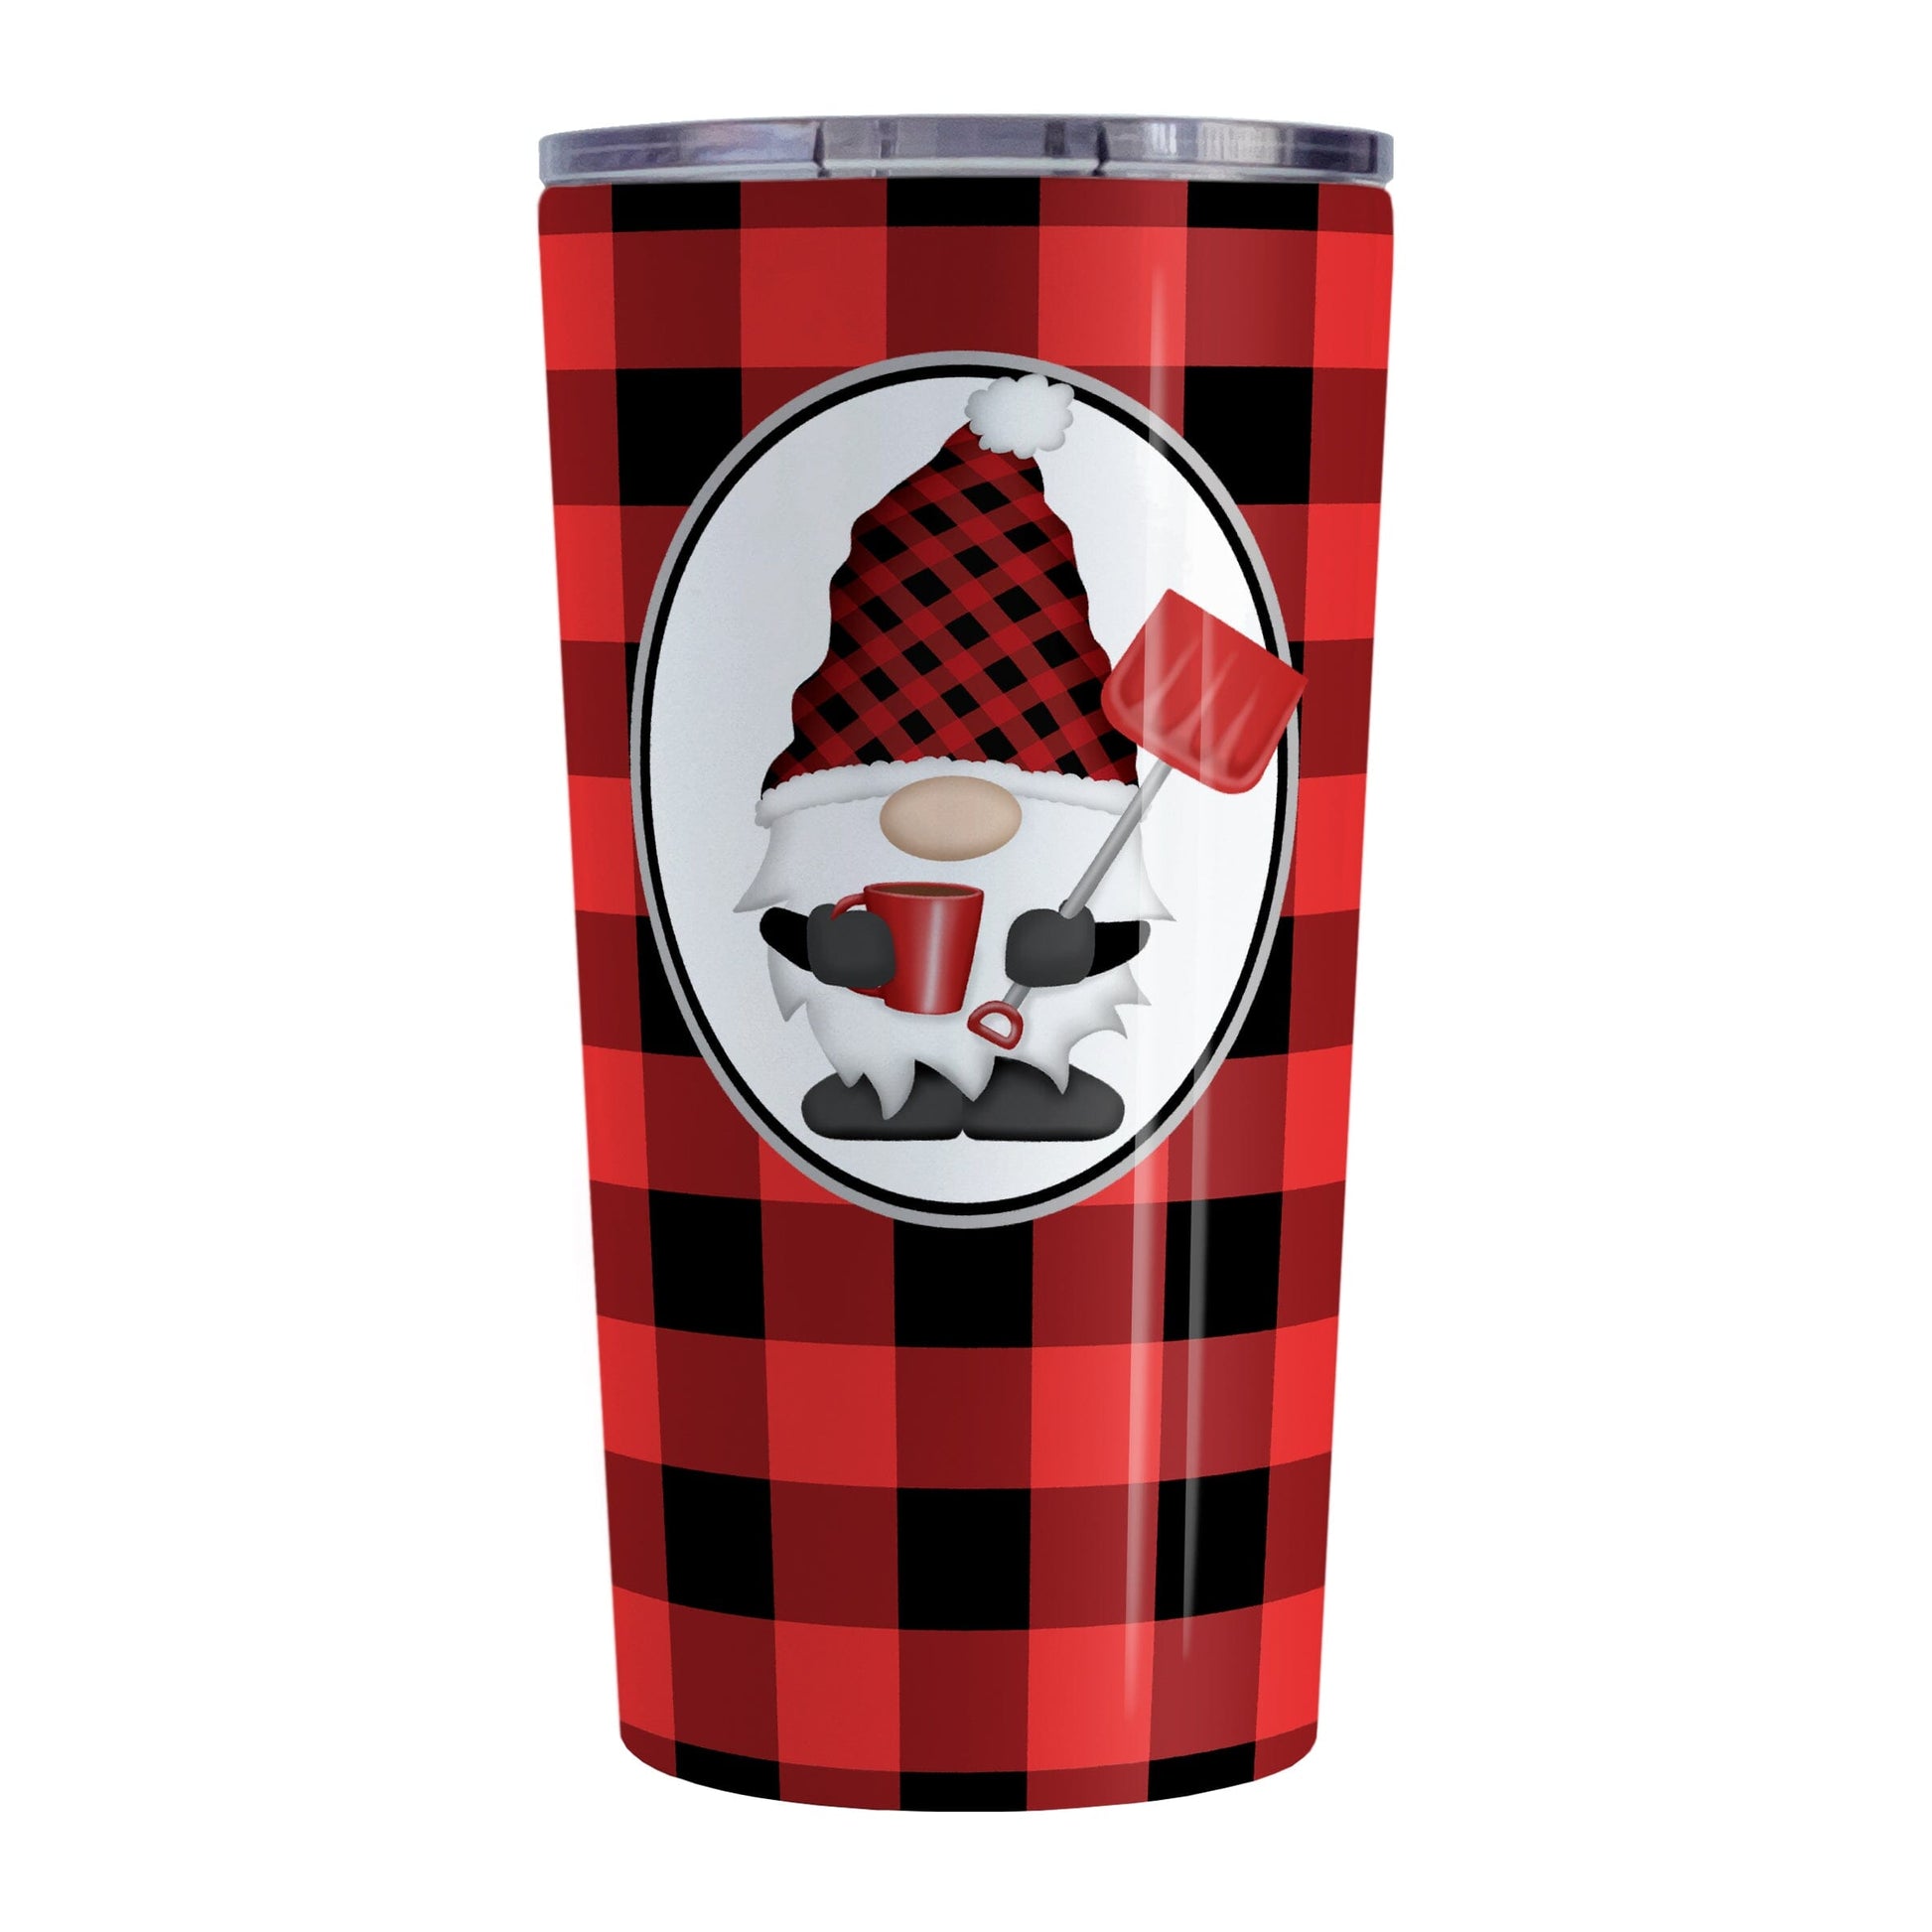 Red Gnome Buffalo Plaid Tumbler Cup (20oz) at Amy's Coffee Mugs. A stainless steel tumbler cup designed with an adorable gnome wearing a red and black buffalo check hat and holding a hot beverage and a snow shovel in a white oval over a red and black buffalo plaid pattern background that wraps around the cup.